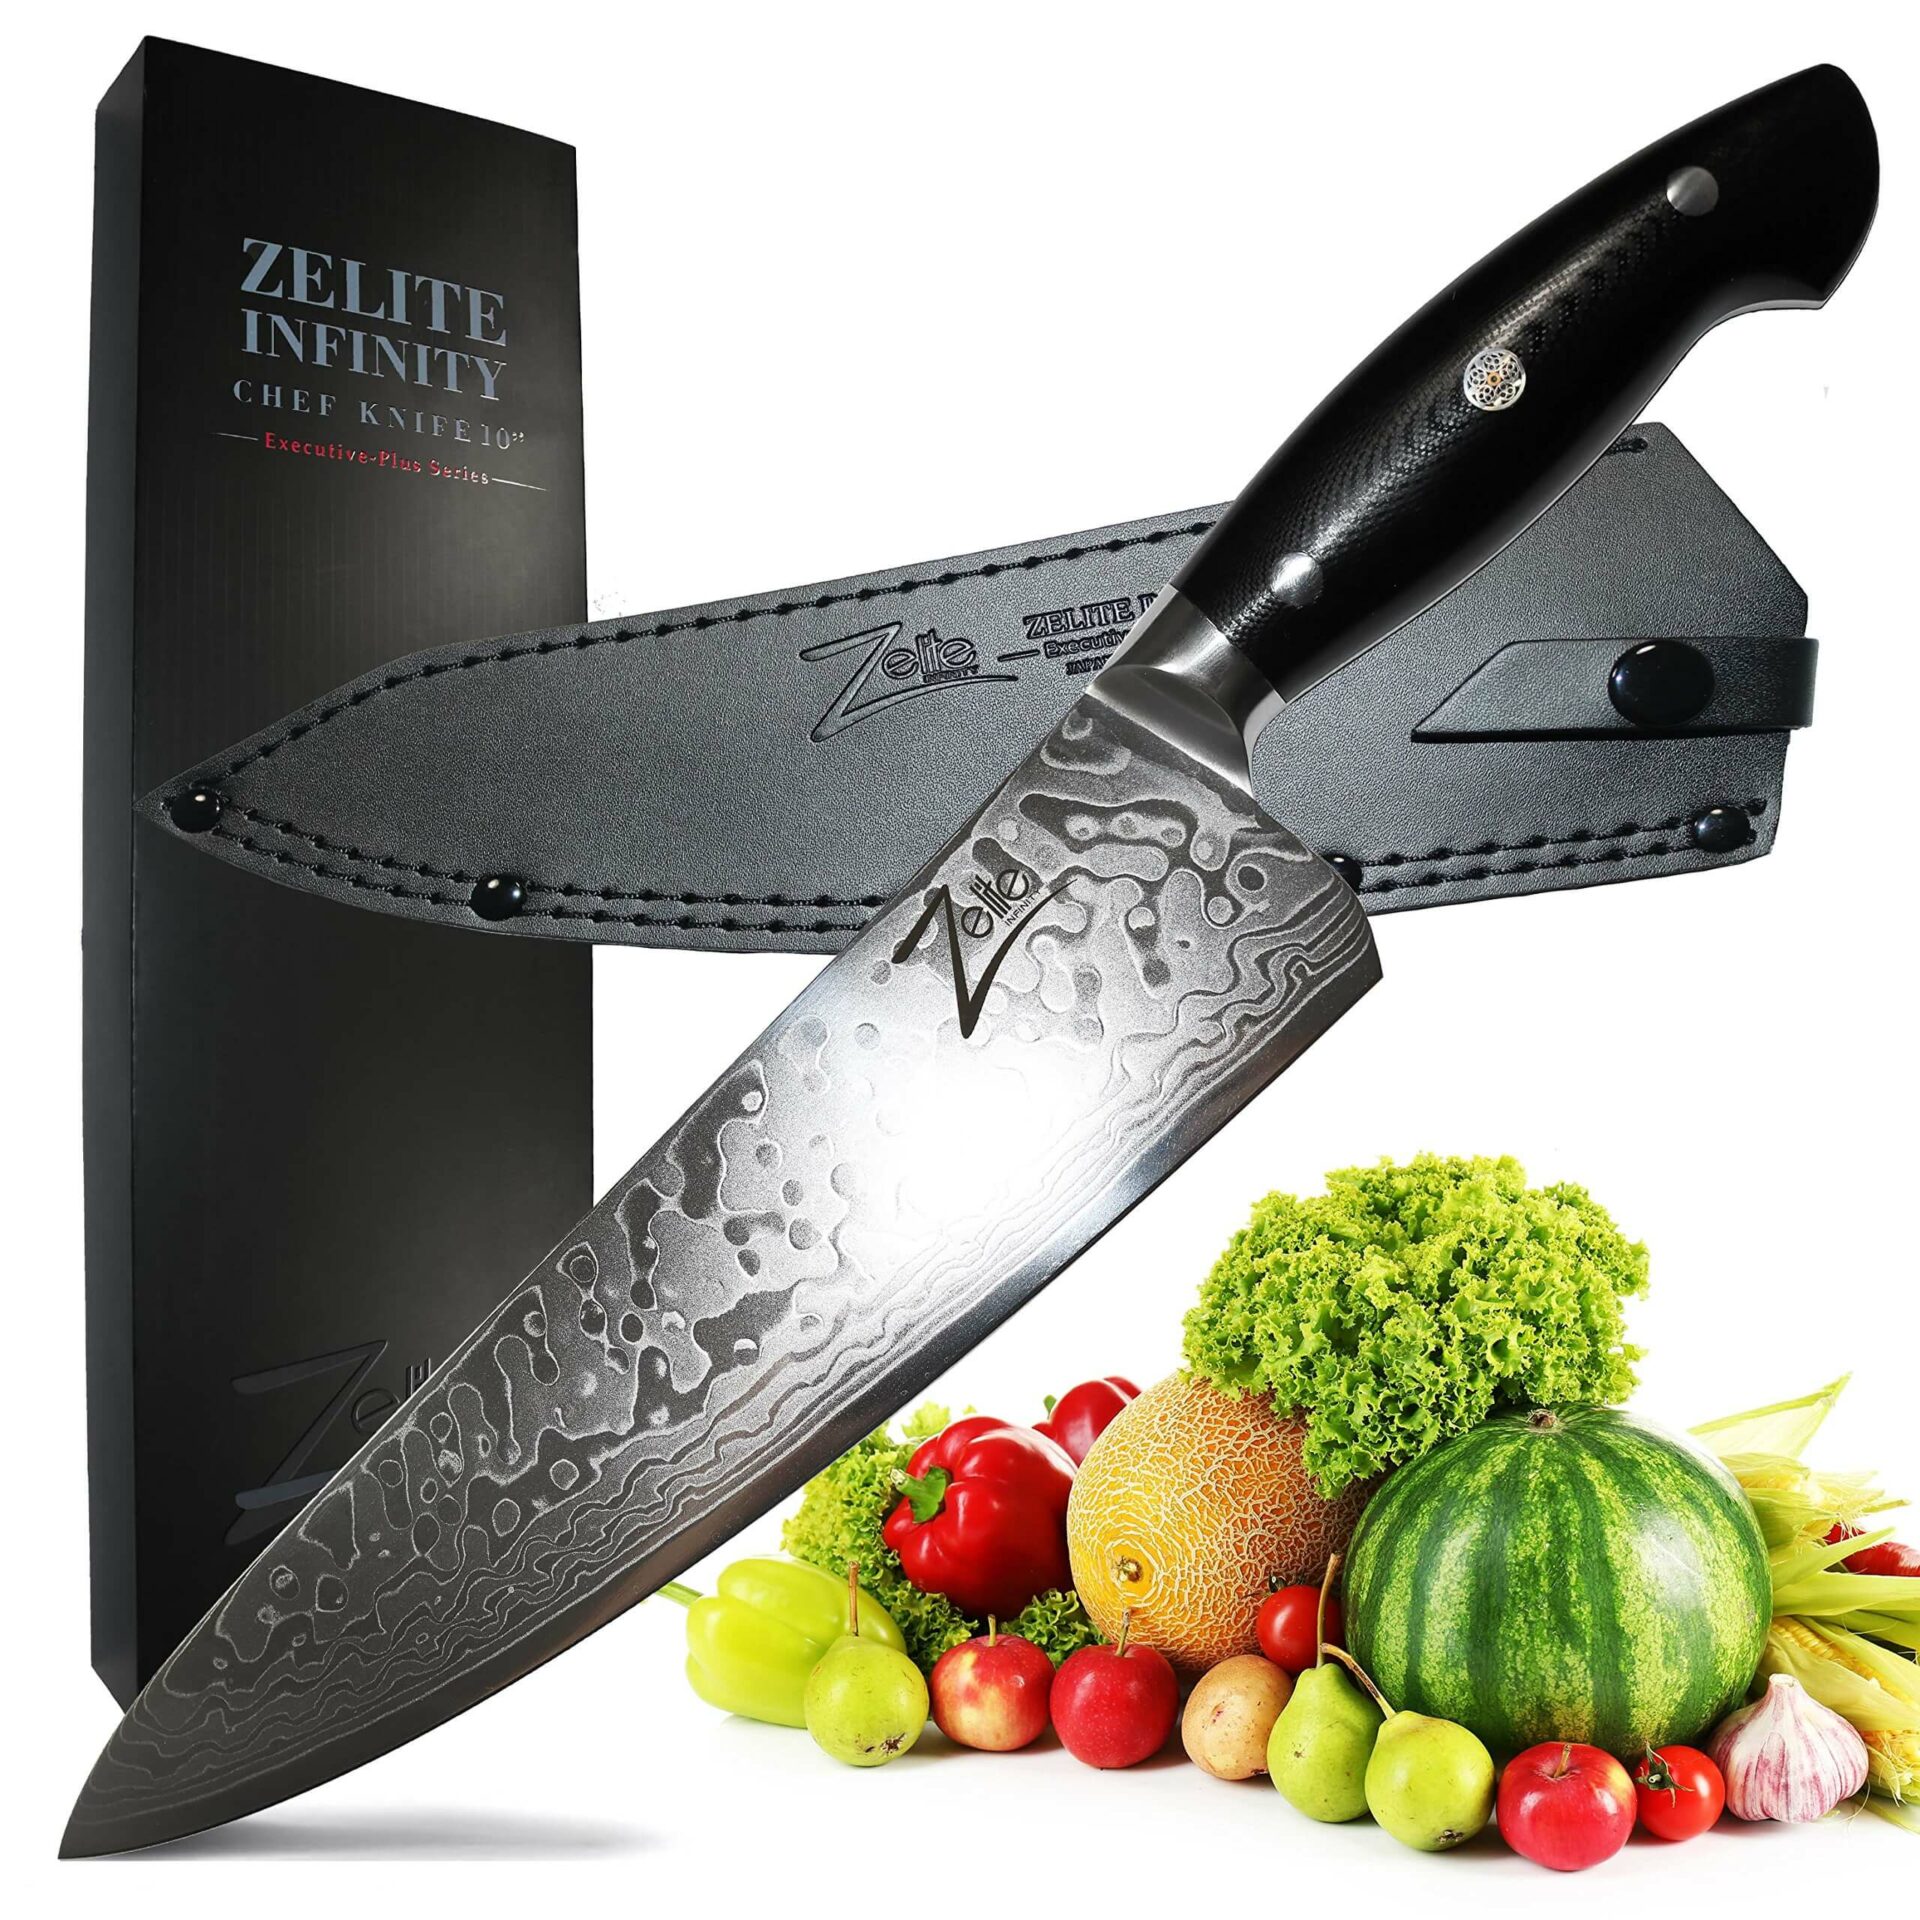 Zelite Infinity Chef Knife 10 Inch, japanese kitchen knives, best knife for home cook